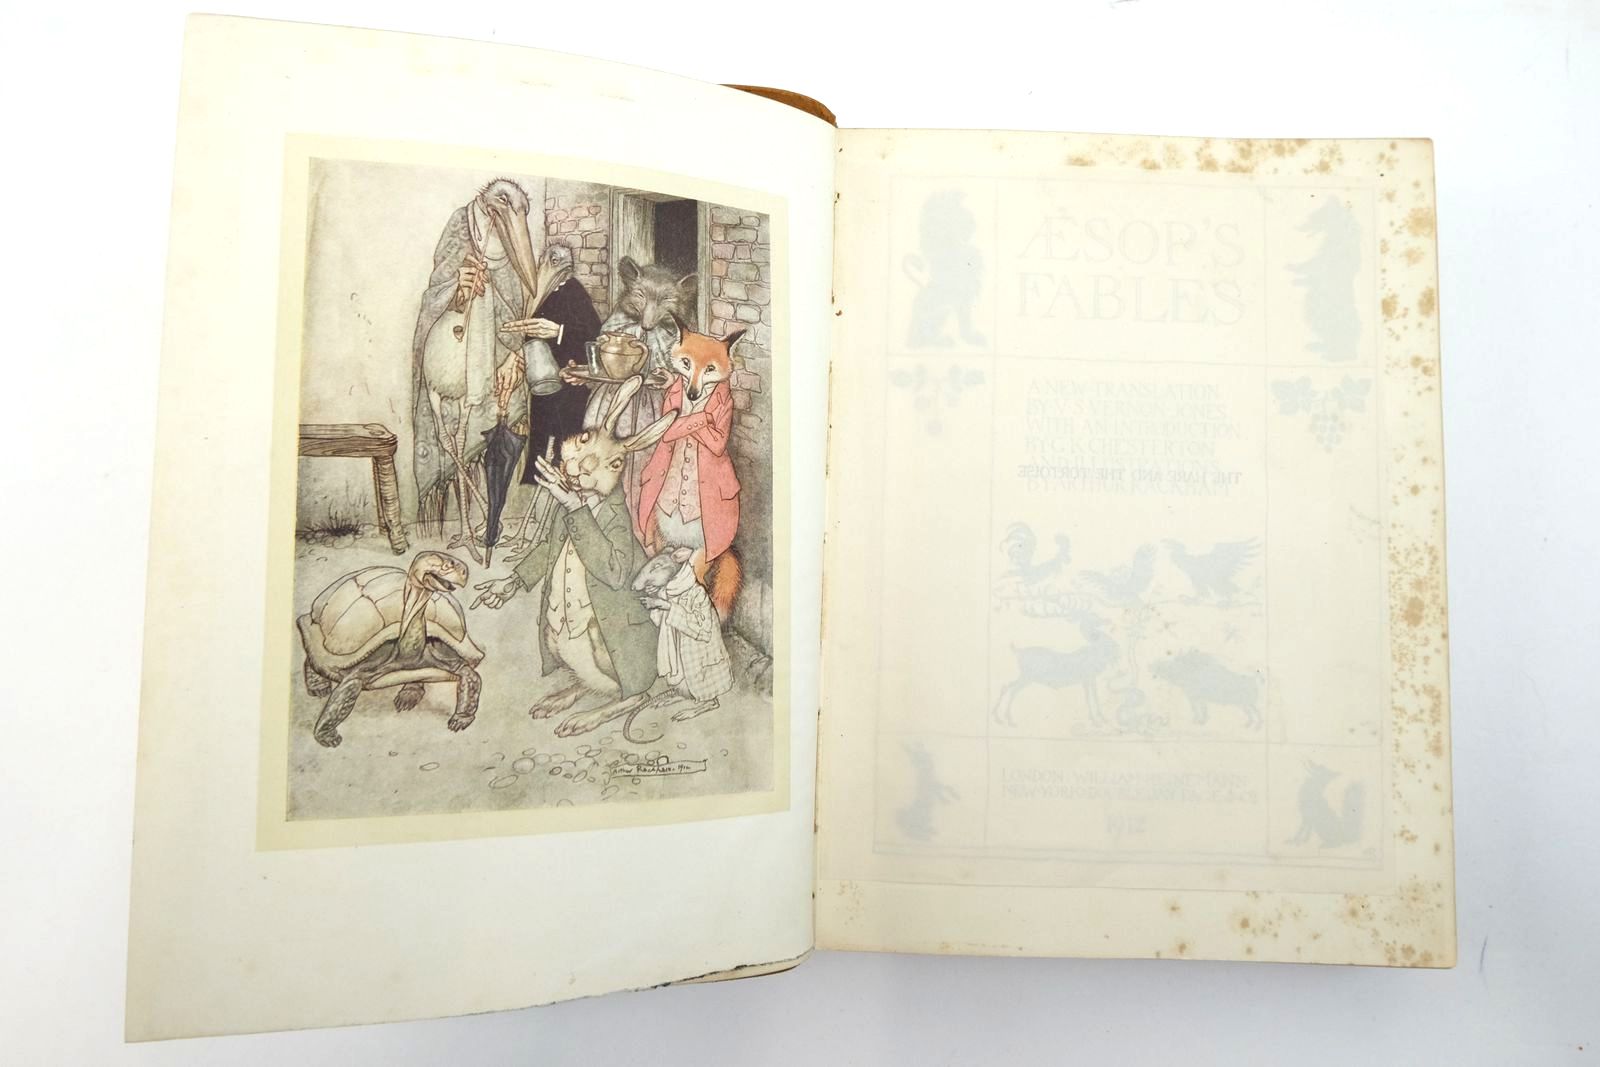 Photo of AESOP'S FABLES written by Aesop,
Jones, V.S. Vernon illustrated by Rackham, Arthur published by William Heinemann (STOCK CODE: 2137922)  for sale by Stella & Rose's Books